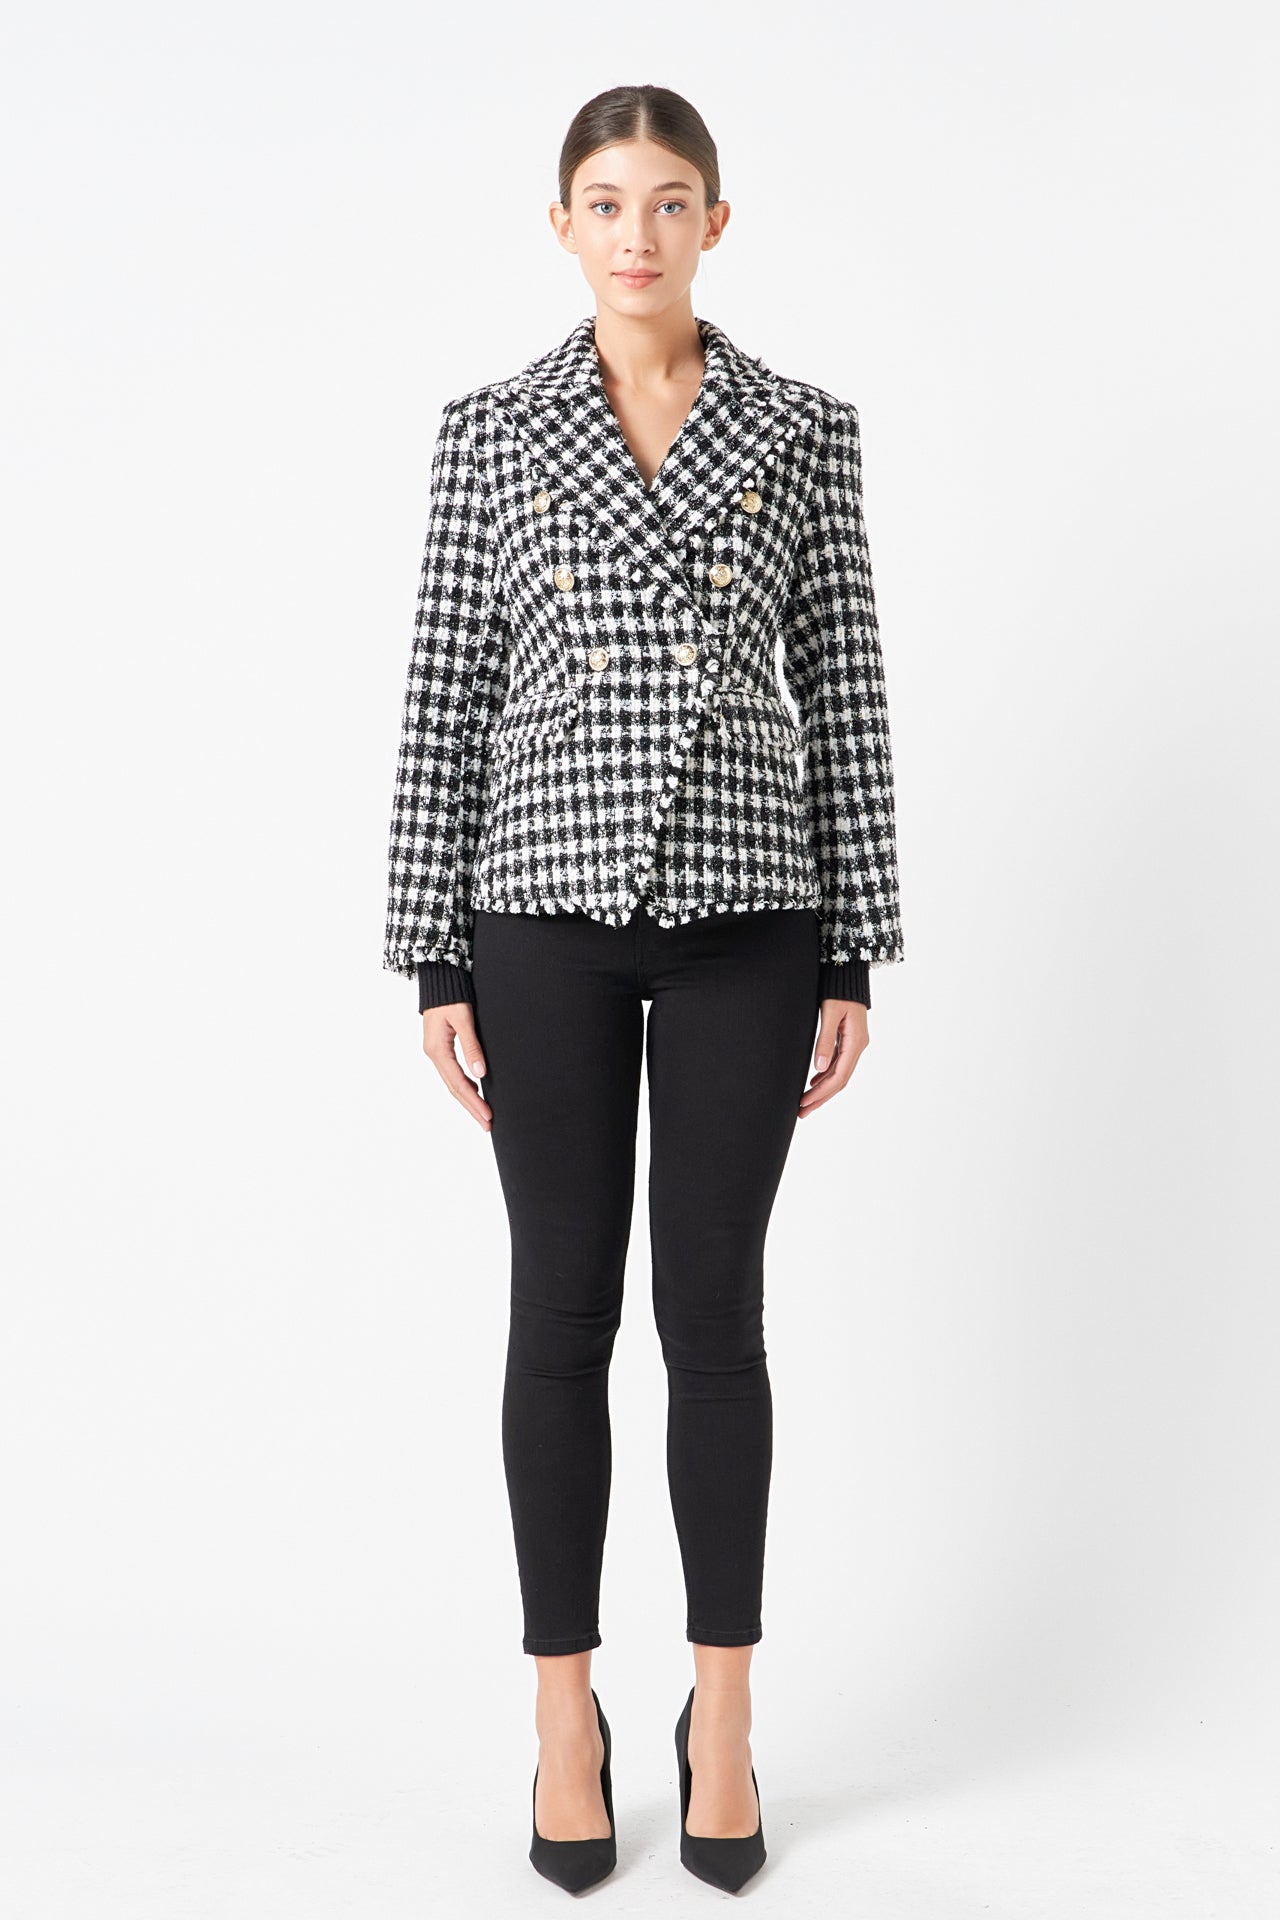 Endless Rose - Premium Checked Tweed Blazer - Blazers in Women's Clothing available at endlessrose.com